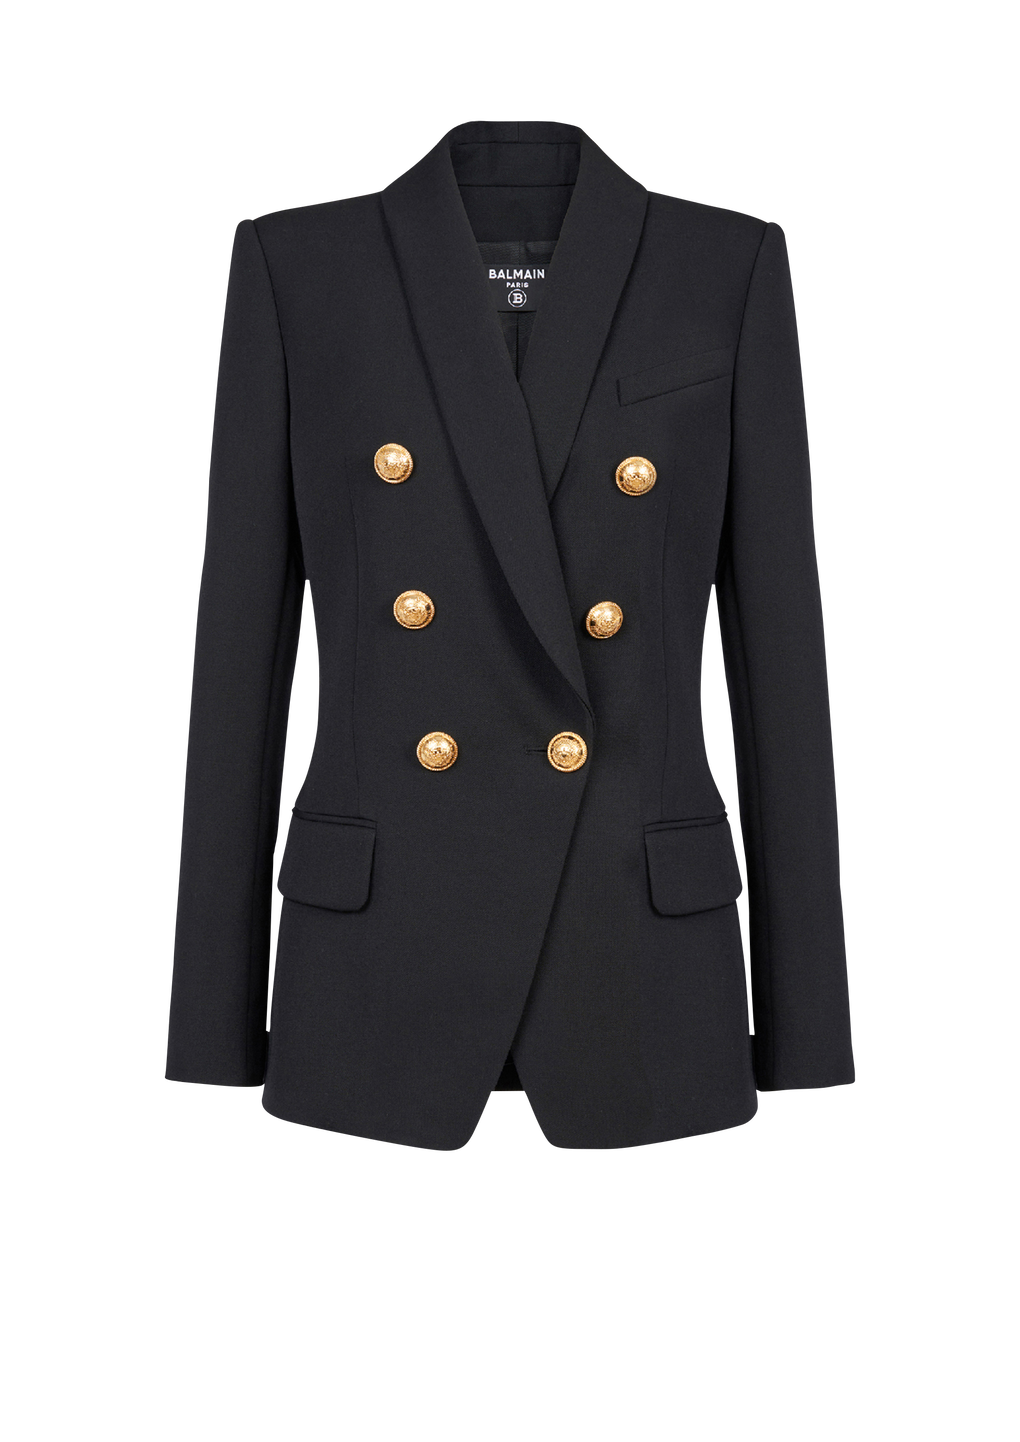 Wool blazer with double-breasted buttoned closure, black, hi-res